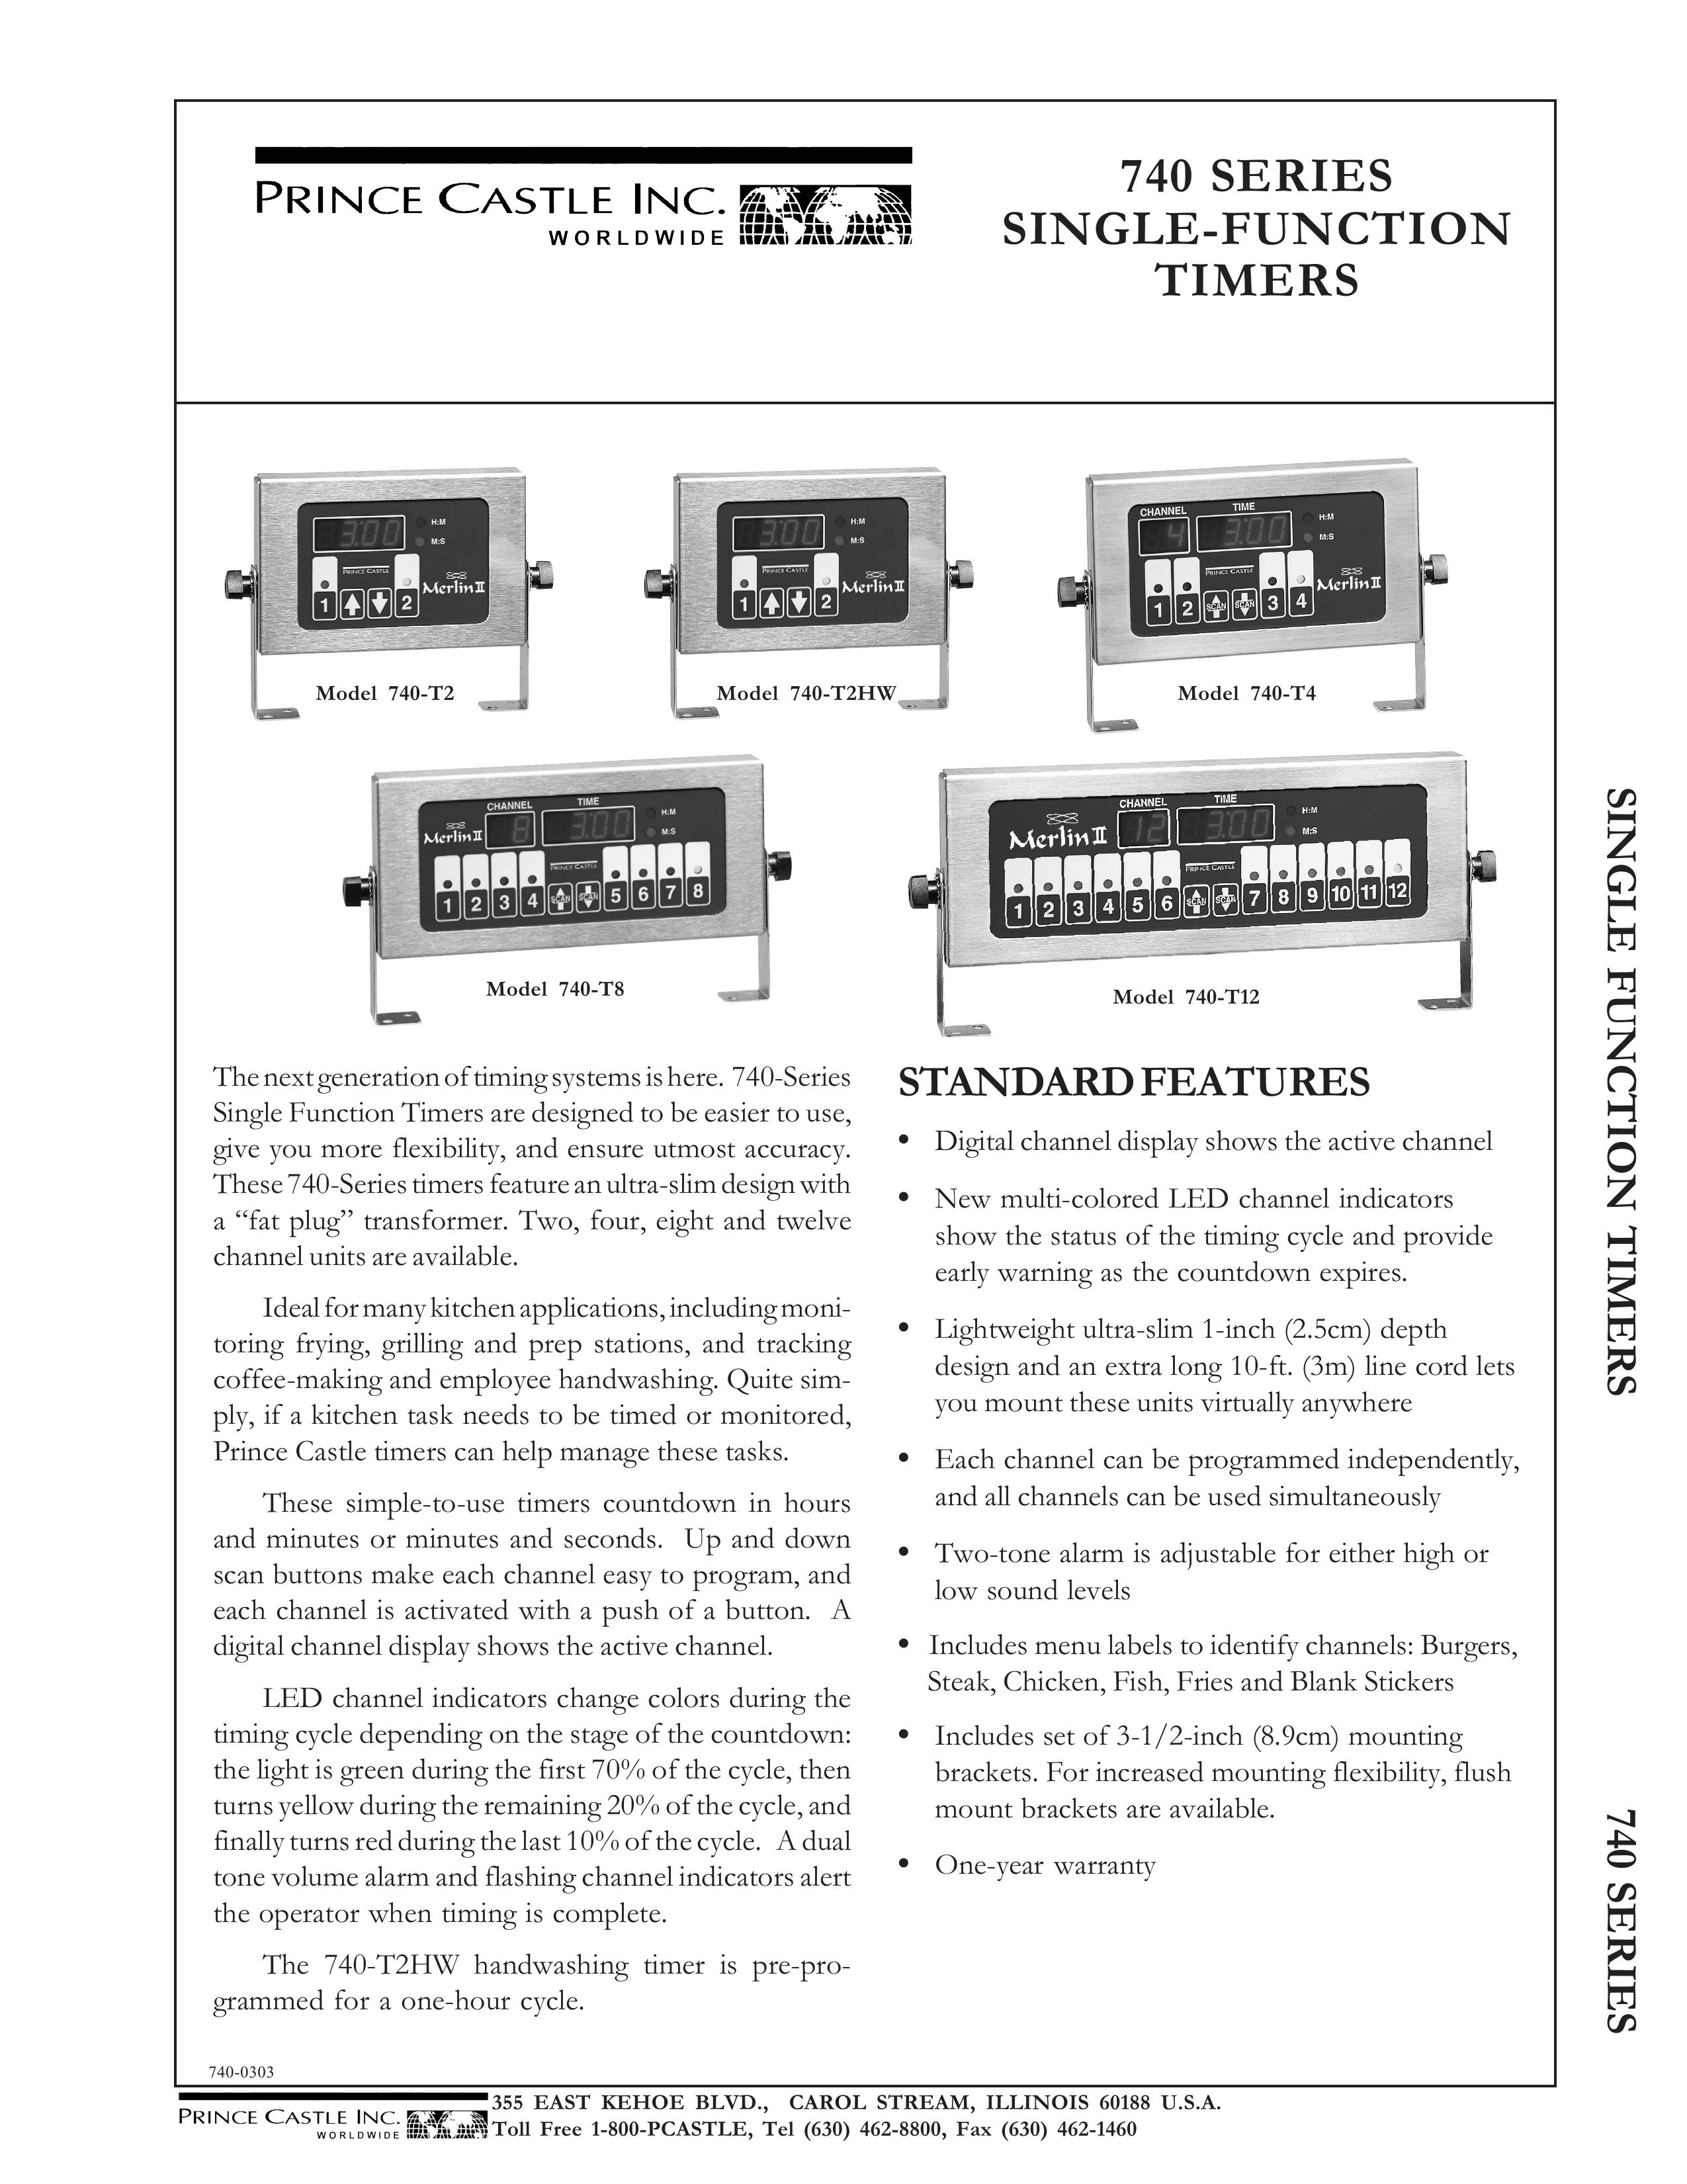 Prince Castle 740-T8 Outdoor Timer User Manual (Page 1)